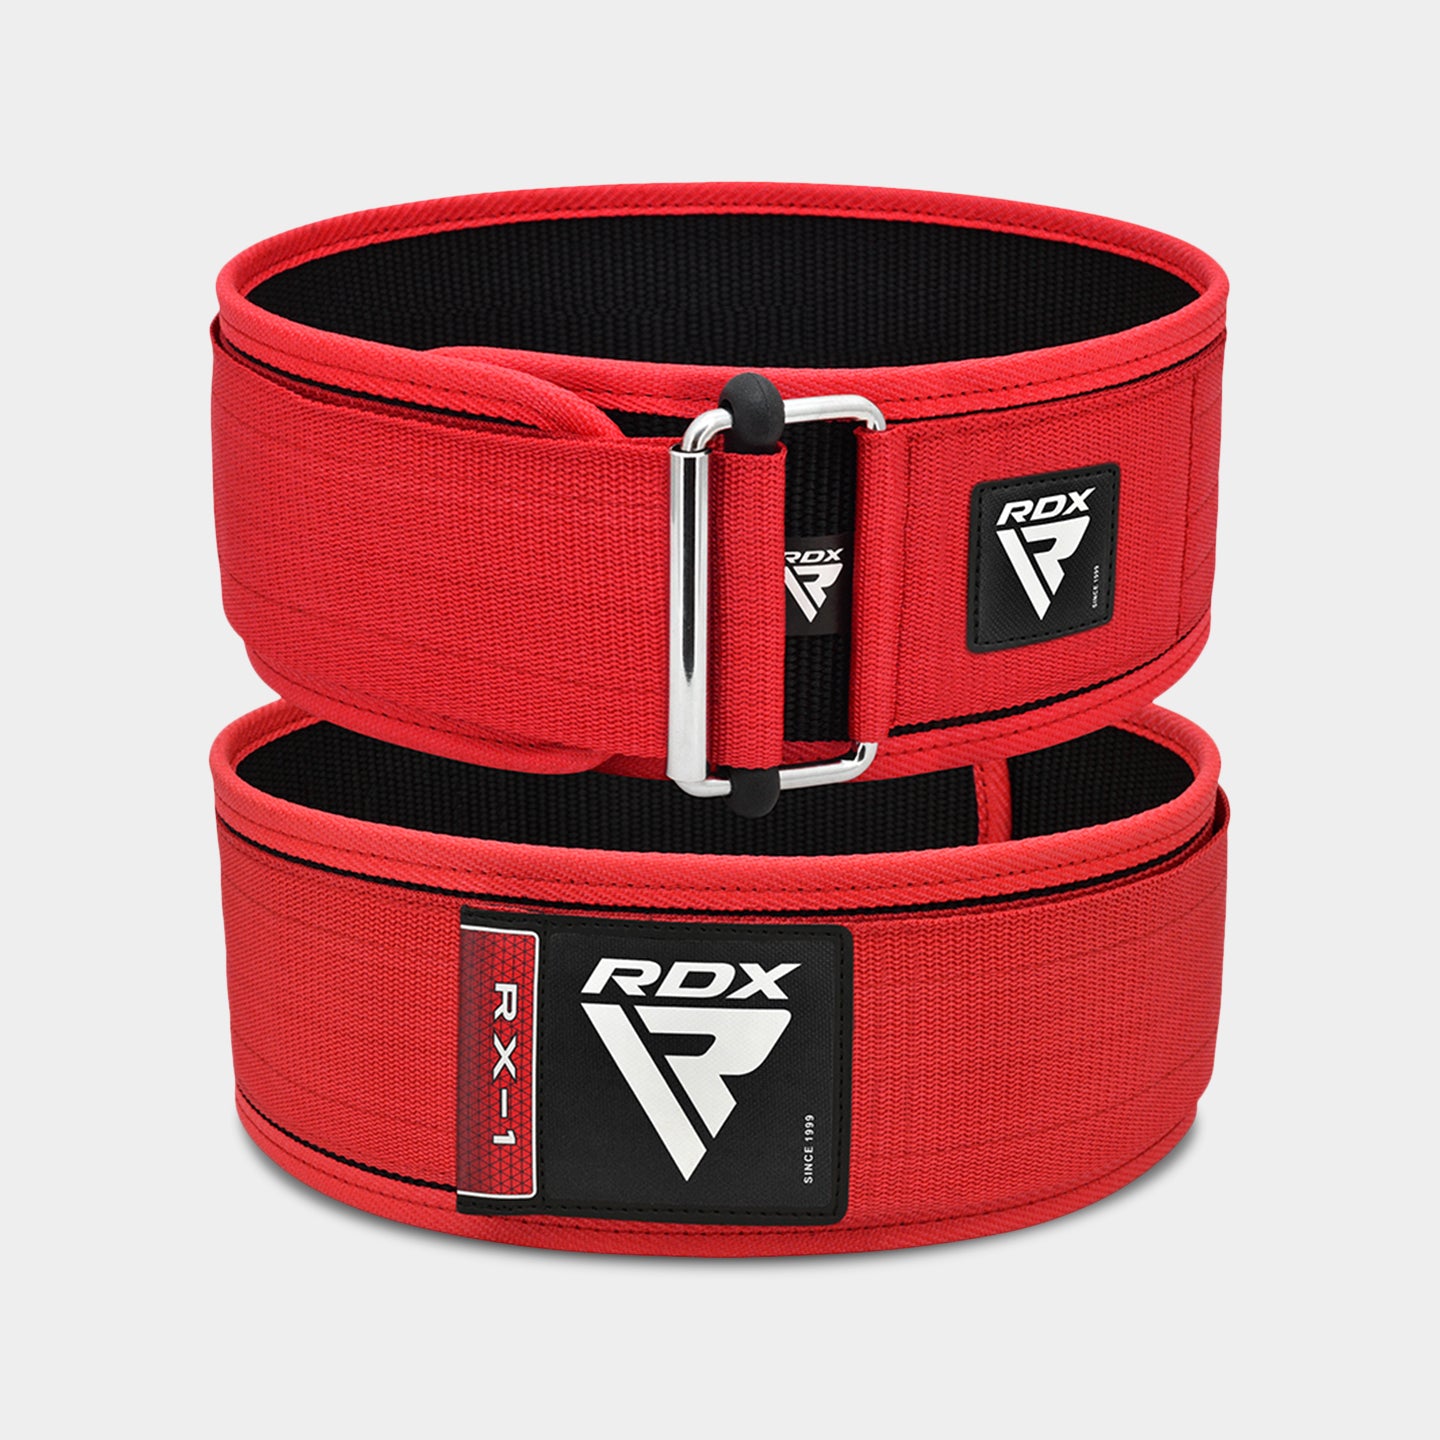 RDX Sports RX1 Weightlifting Belt, S, Red A1